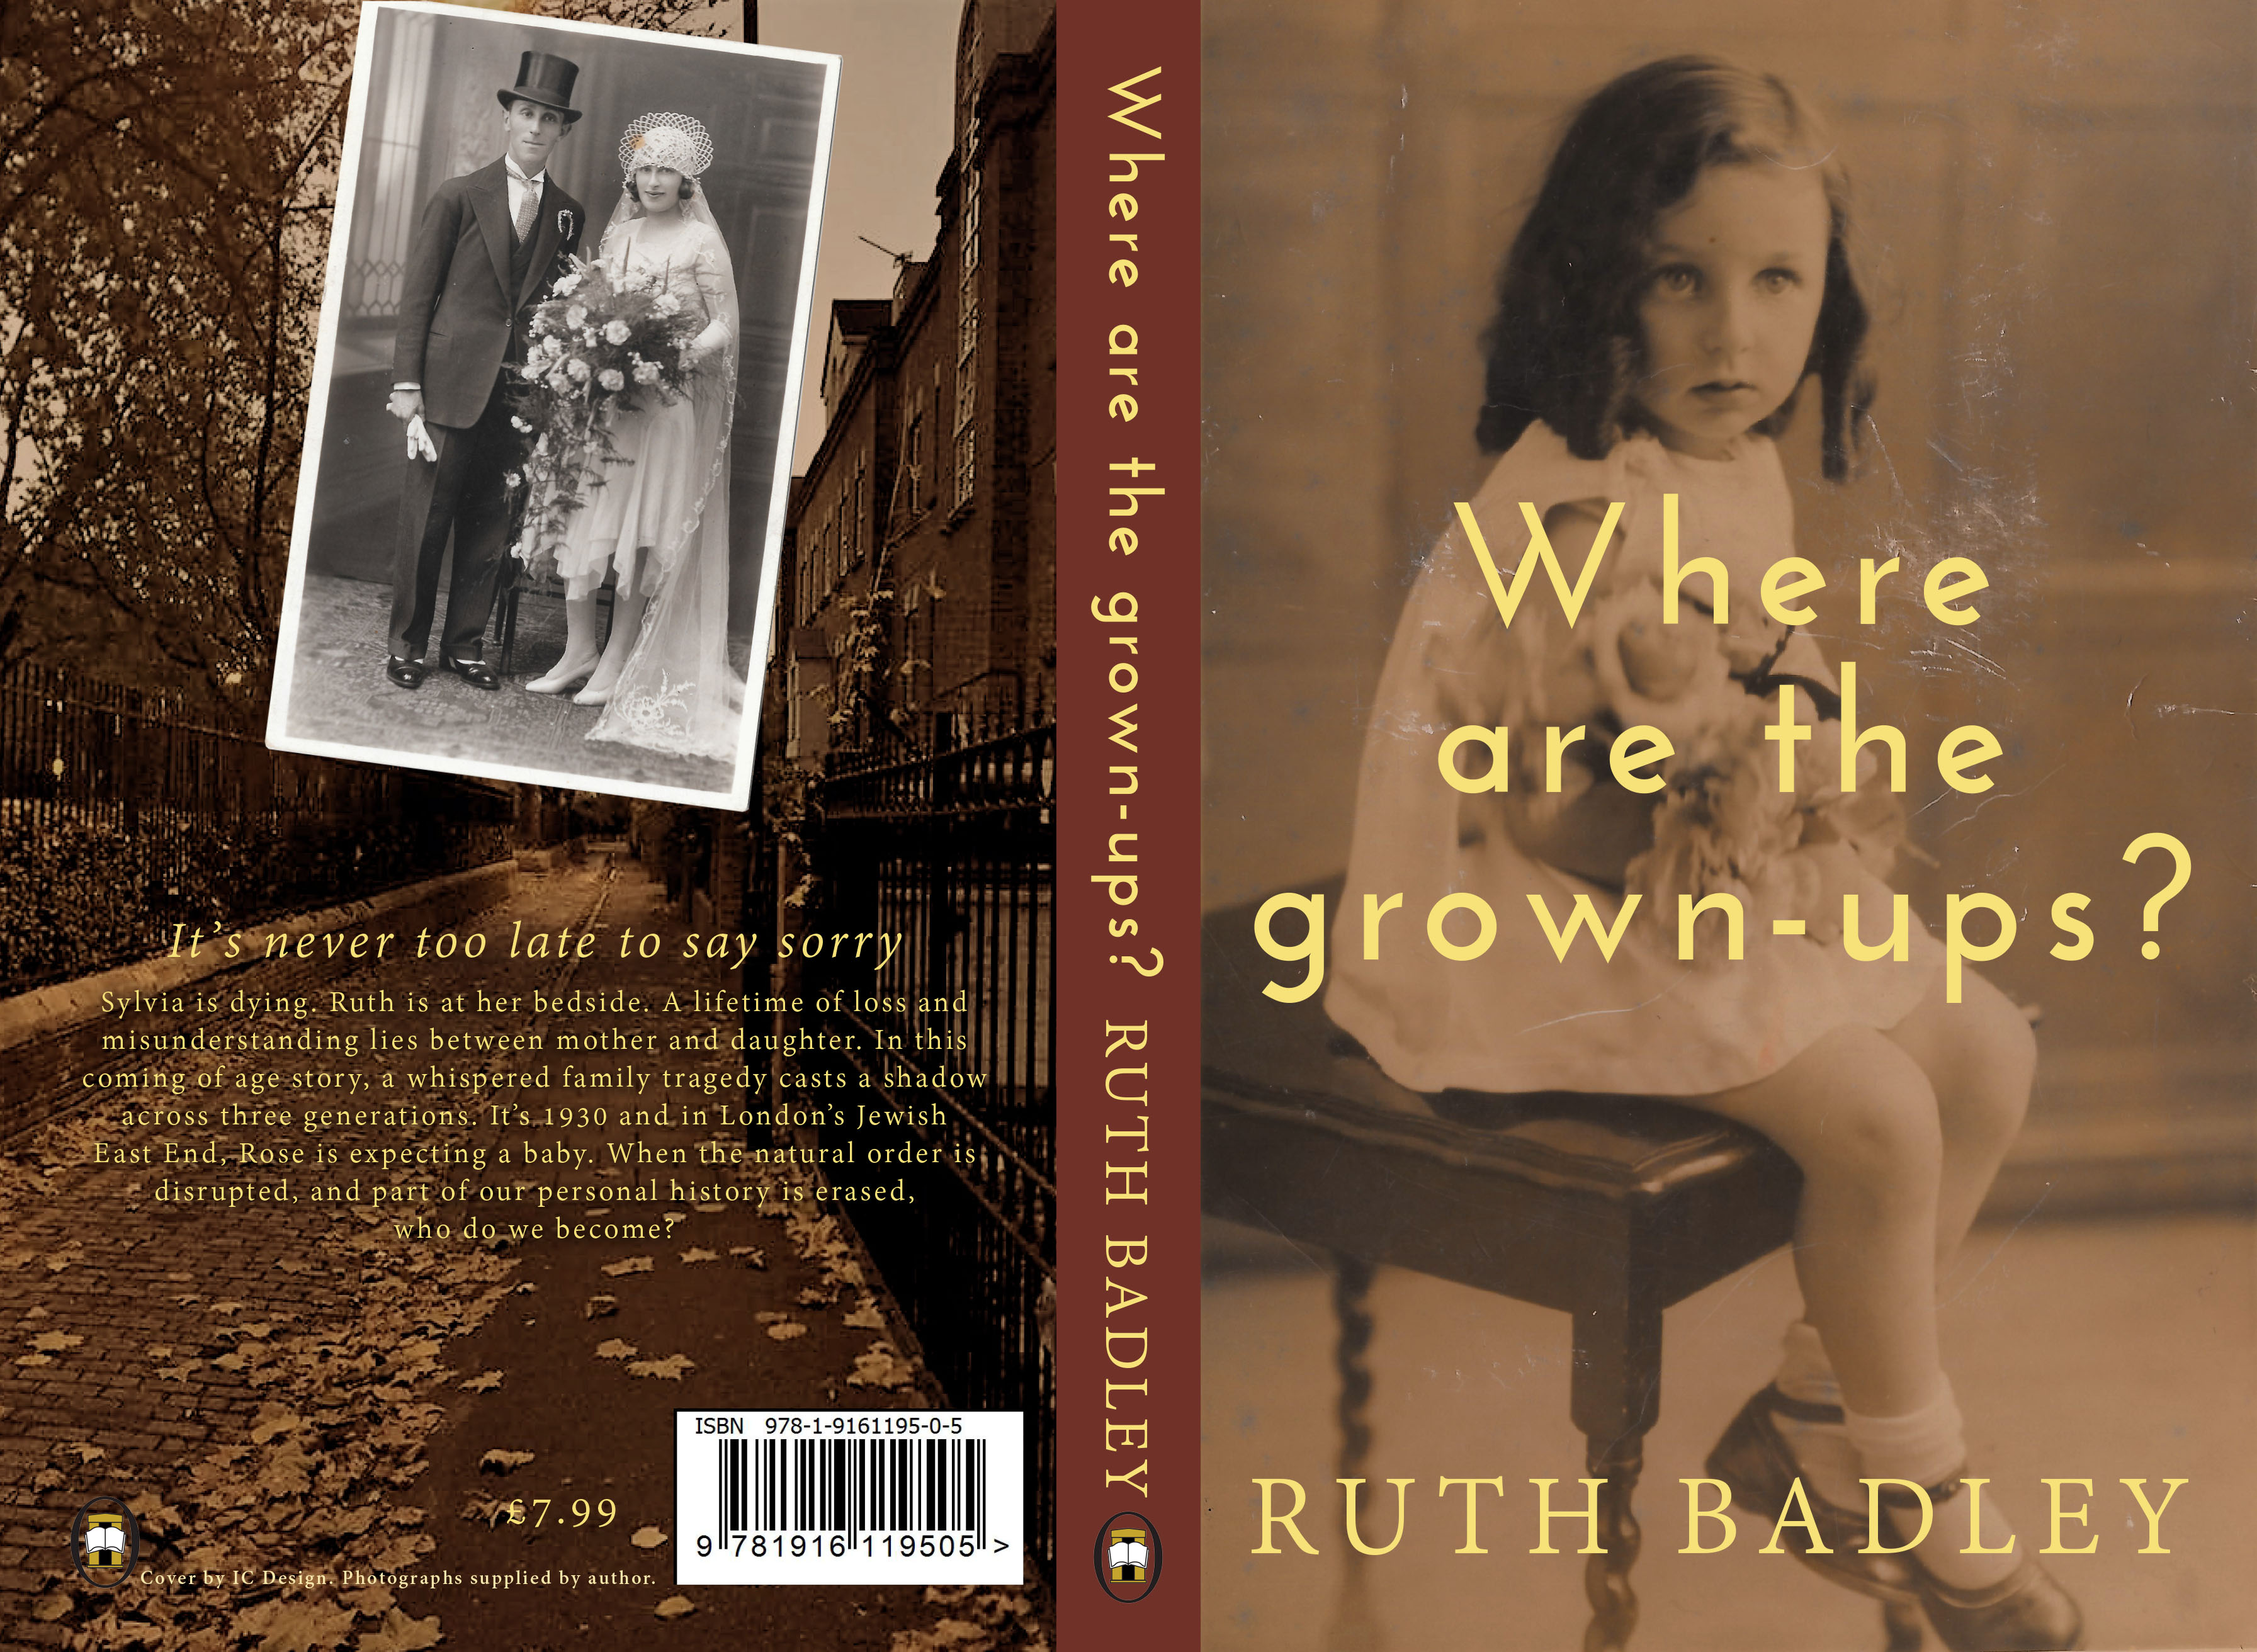 Reviews for Where are the grown-ups?